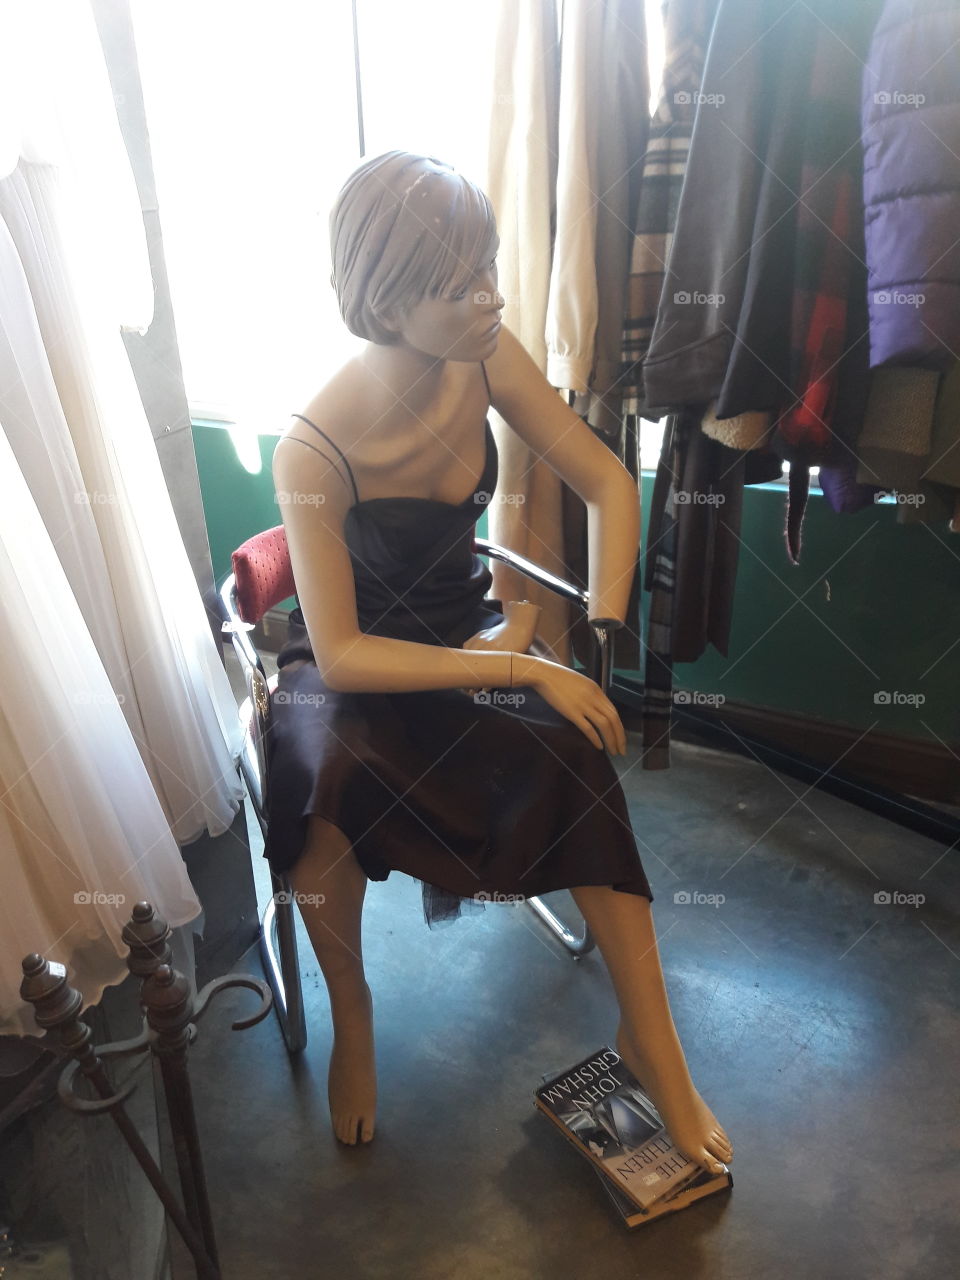 mannequin  at the thrift shop.